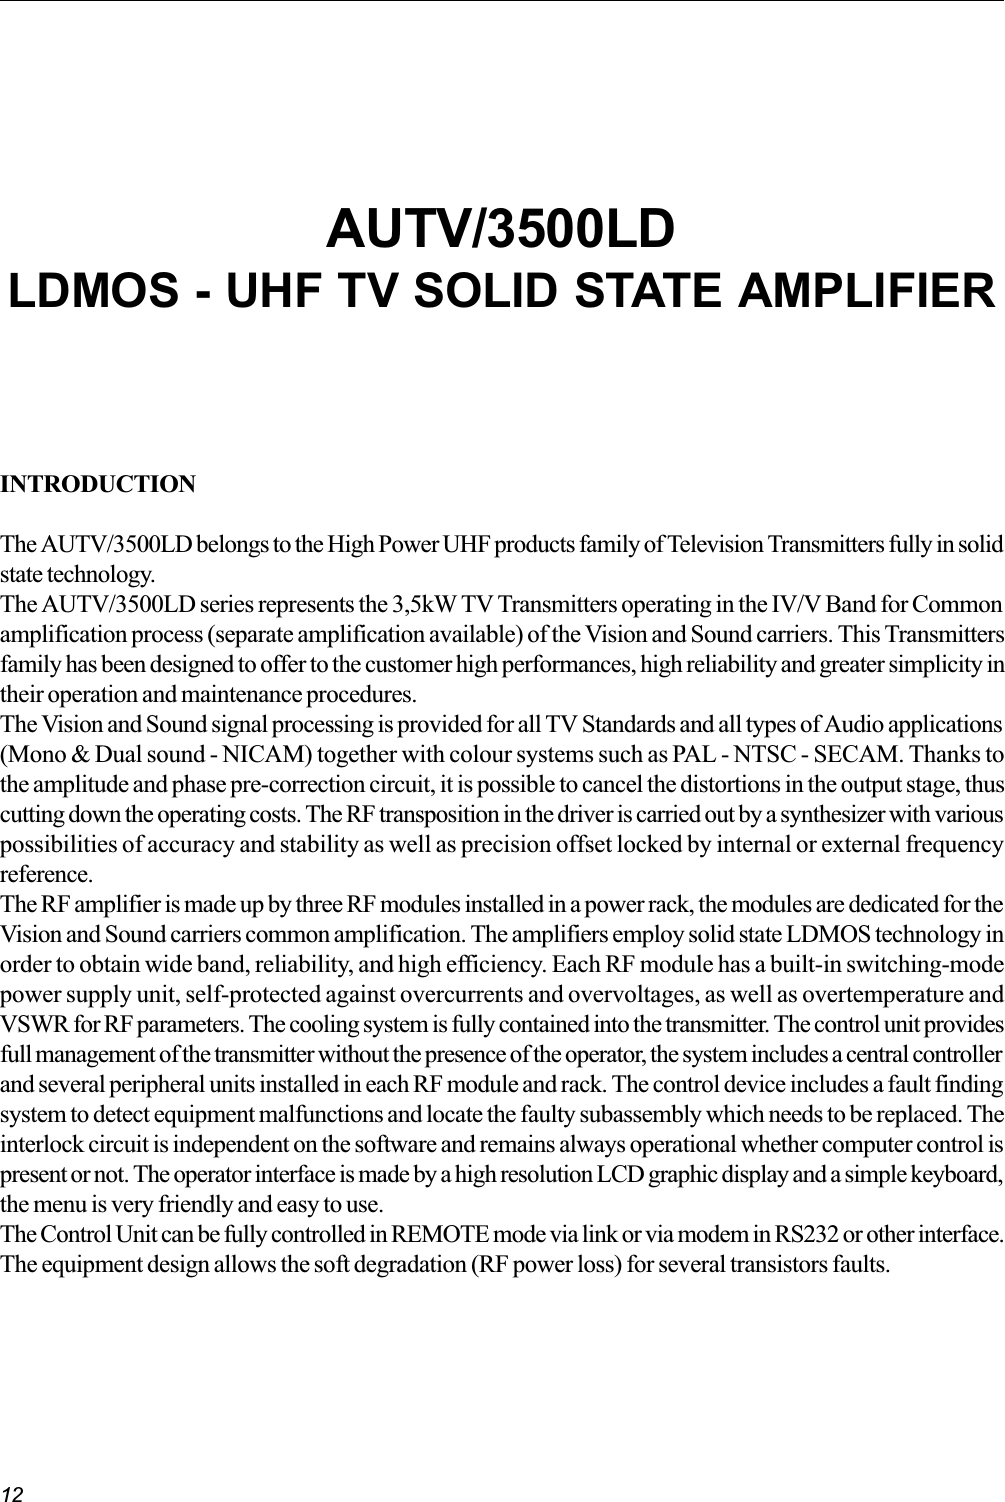 12INTRODUCTIONThe AUTV/3500LD belongs to the High Power UHF products family of Television Transmitters fully in solidstate technology.The AUTV/3500LD series represents the 3,5kW TV Transmitters operating in the IV/V Band for Commonamplification process (separate amplification available) of the Vision and Sound carriers. This Transmittersfamily has been designed to offer to the customer high performances, high reliability and greater simplicity intheir operation and maintenance procedures.The Vision and Sound signal processing is provided for all TV Standards and all types of Audio applications(Mono &amp; Dual sound - NICAM) together with colour systems such as PAL - NTSC - SECAM. Thanks tothe amplitude and phase pre-correction circuit, it is possible to cancel the distortions in the output stage, thuscutting down the operating costs. The RF transposition in the driver is carried out by a synthesizer with variouspossibilities of accuracy and stability as well as precision offset locked by internal or external frequencyreference.The RF amplifier is made up by three RF modules installed in a power rack, the modules are dedicated for theVision and Sound carriers common amplification. The amplifiers employ solid state LDMOS technology inorder to obtain wide band, reliability, and high efficiency. Each RF module has a built-in switching-modepower supply unit, self-protected against overcurrents and overvoltages, as well as overtemperature andVSWR for RF parameters. The cooling system is fully contained into the transmitter. The control unit providesfull management of the transmitter without the presence of the operator, the system includes a central controllerand several peripheral units installed in each RF module and rack. The control device includes a fault findingsystem to detect equipment malfunctions and locate the faulty subassembly which needs to be replaced. Theinterlock circuit is independent on the software and remains always operational whether computer control ispresent or not. The operator interface is made by a high resolution LCD graphic display and a simple keyboard,the menu is very friendly and easy to use.The Control Unit can be fully controlled in REMOTE mode via link or via modem in RS232 or other interface.The equipment design allows the soft degradation (RF power loss) for several transistors faults.AUTV/3500LDLDMOS - UHF TV SOLID STATE AMPLIFIER